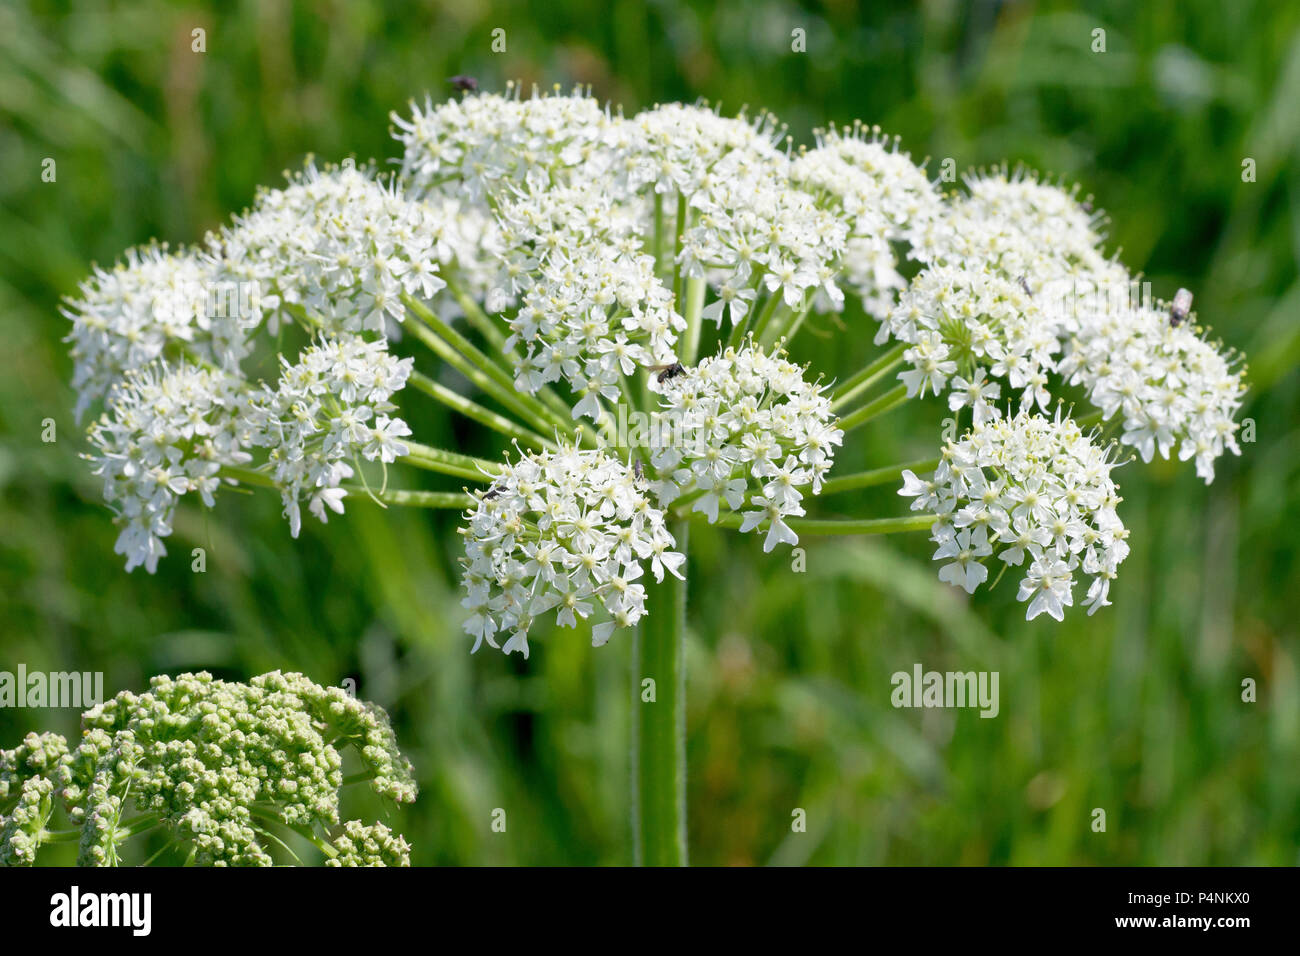 Hogweed or Cow Parsnip (heracleum sphondylium), close up of one the broad flowering heads. Stock Photo